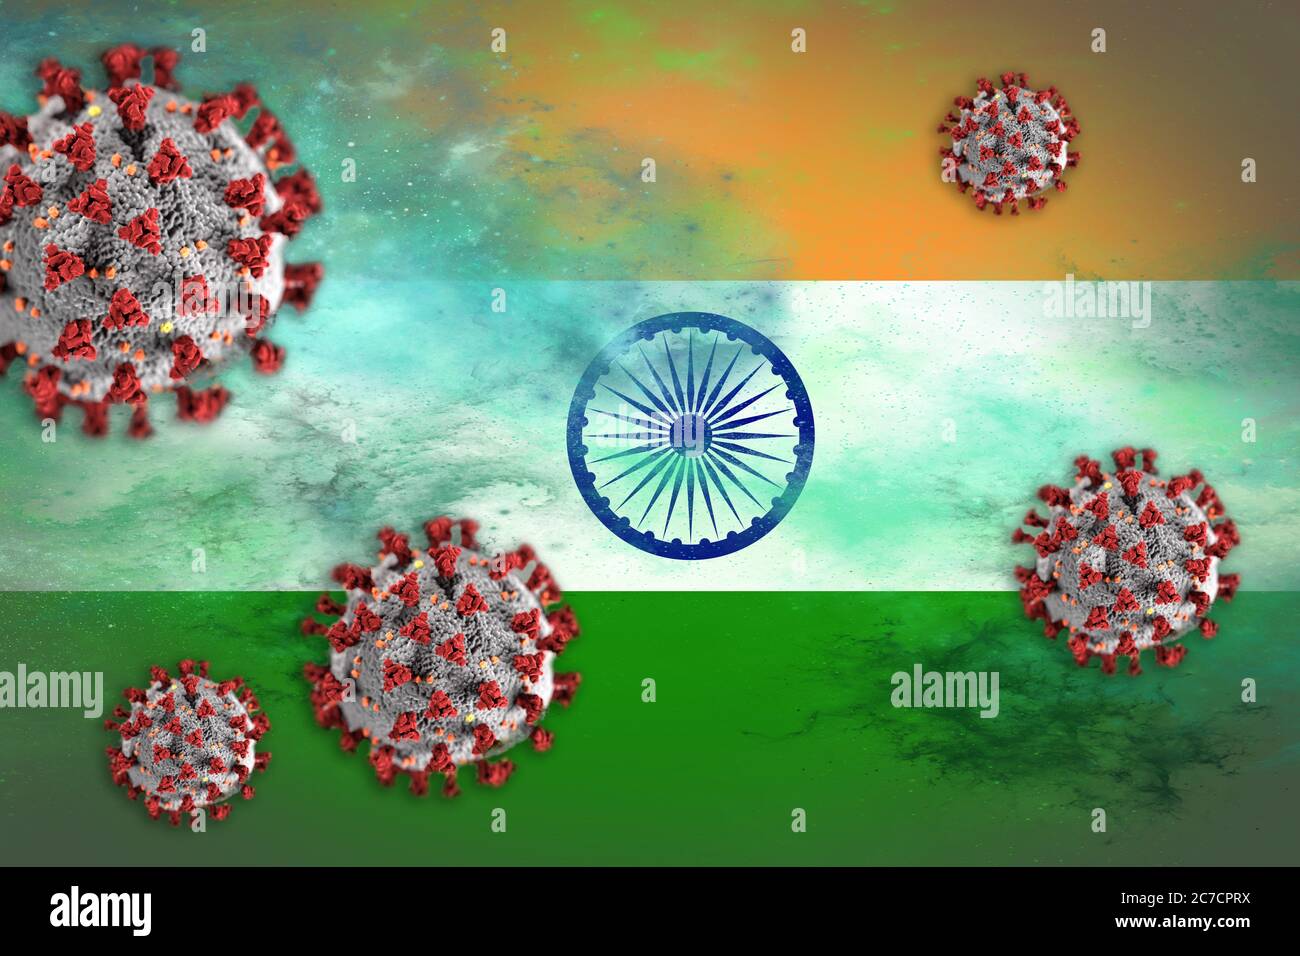 Concept of Coronavirus or Covid-19 particles overshadowing flag of India symbolising outbreak. Stock Photo